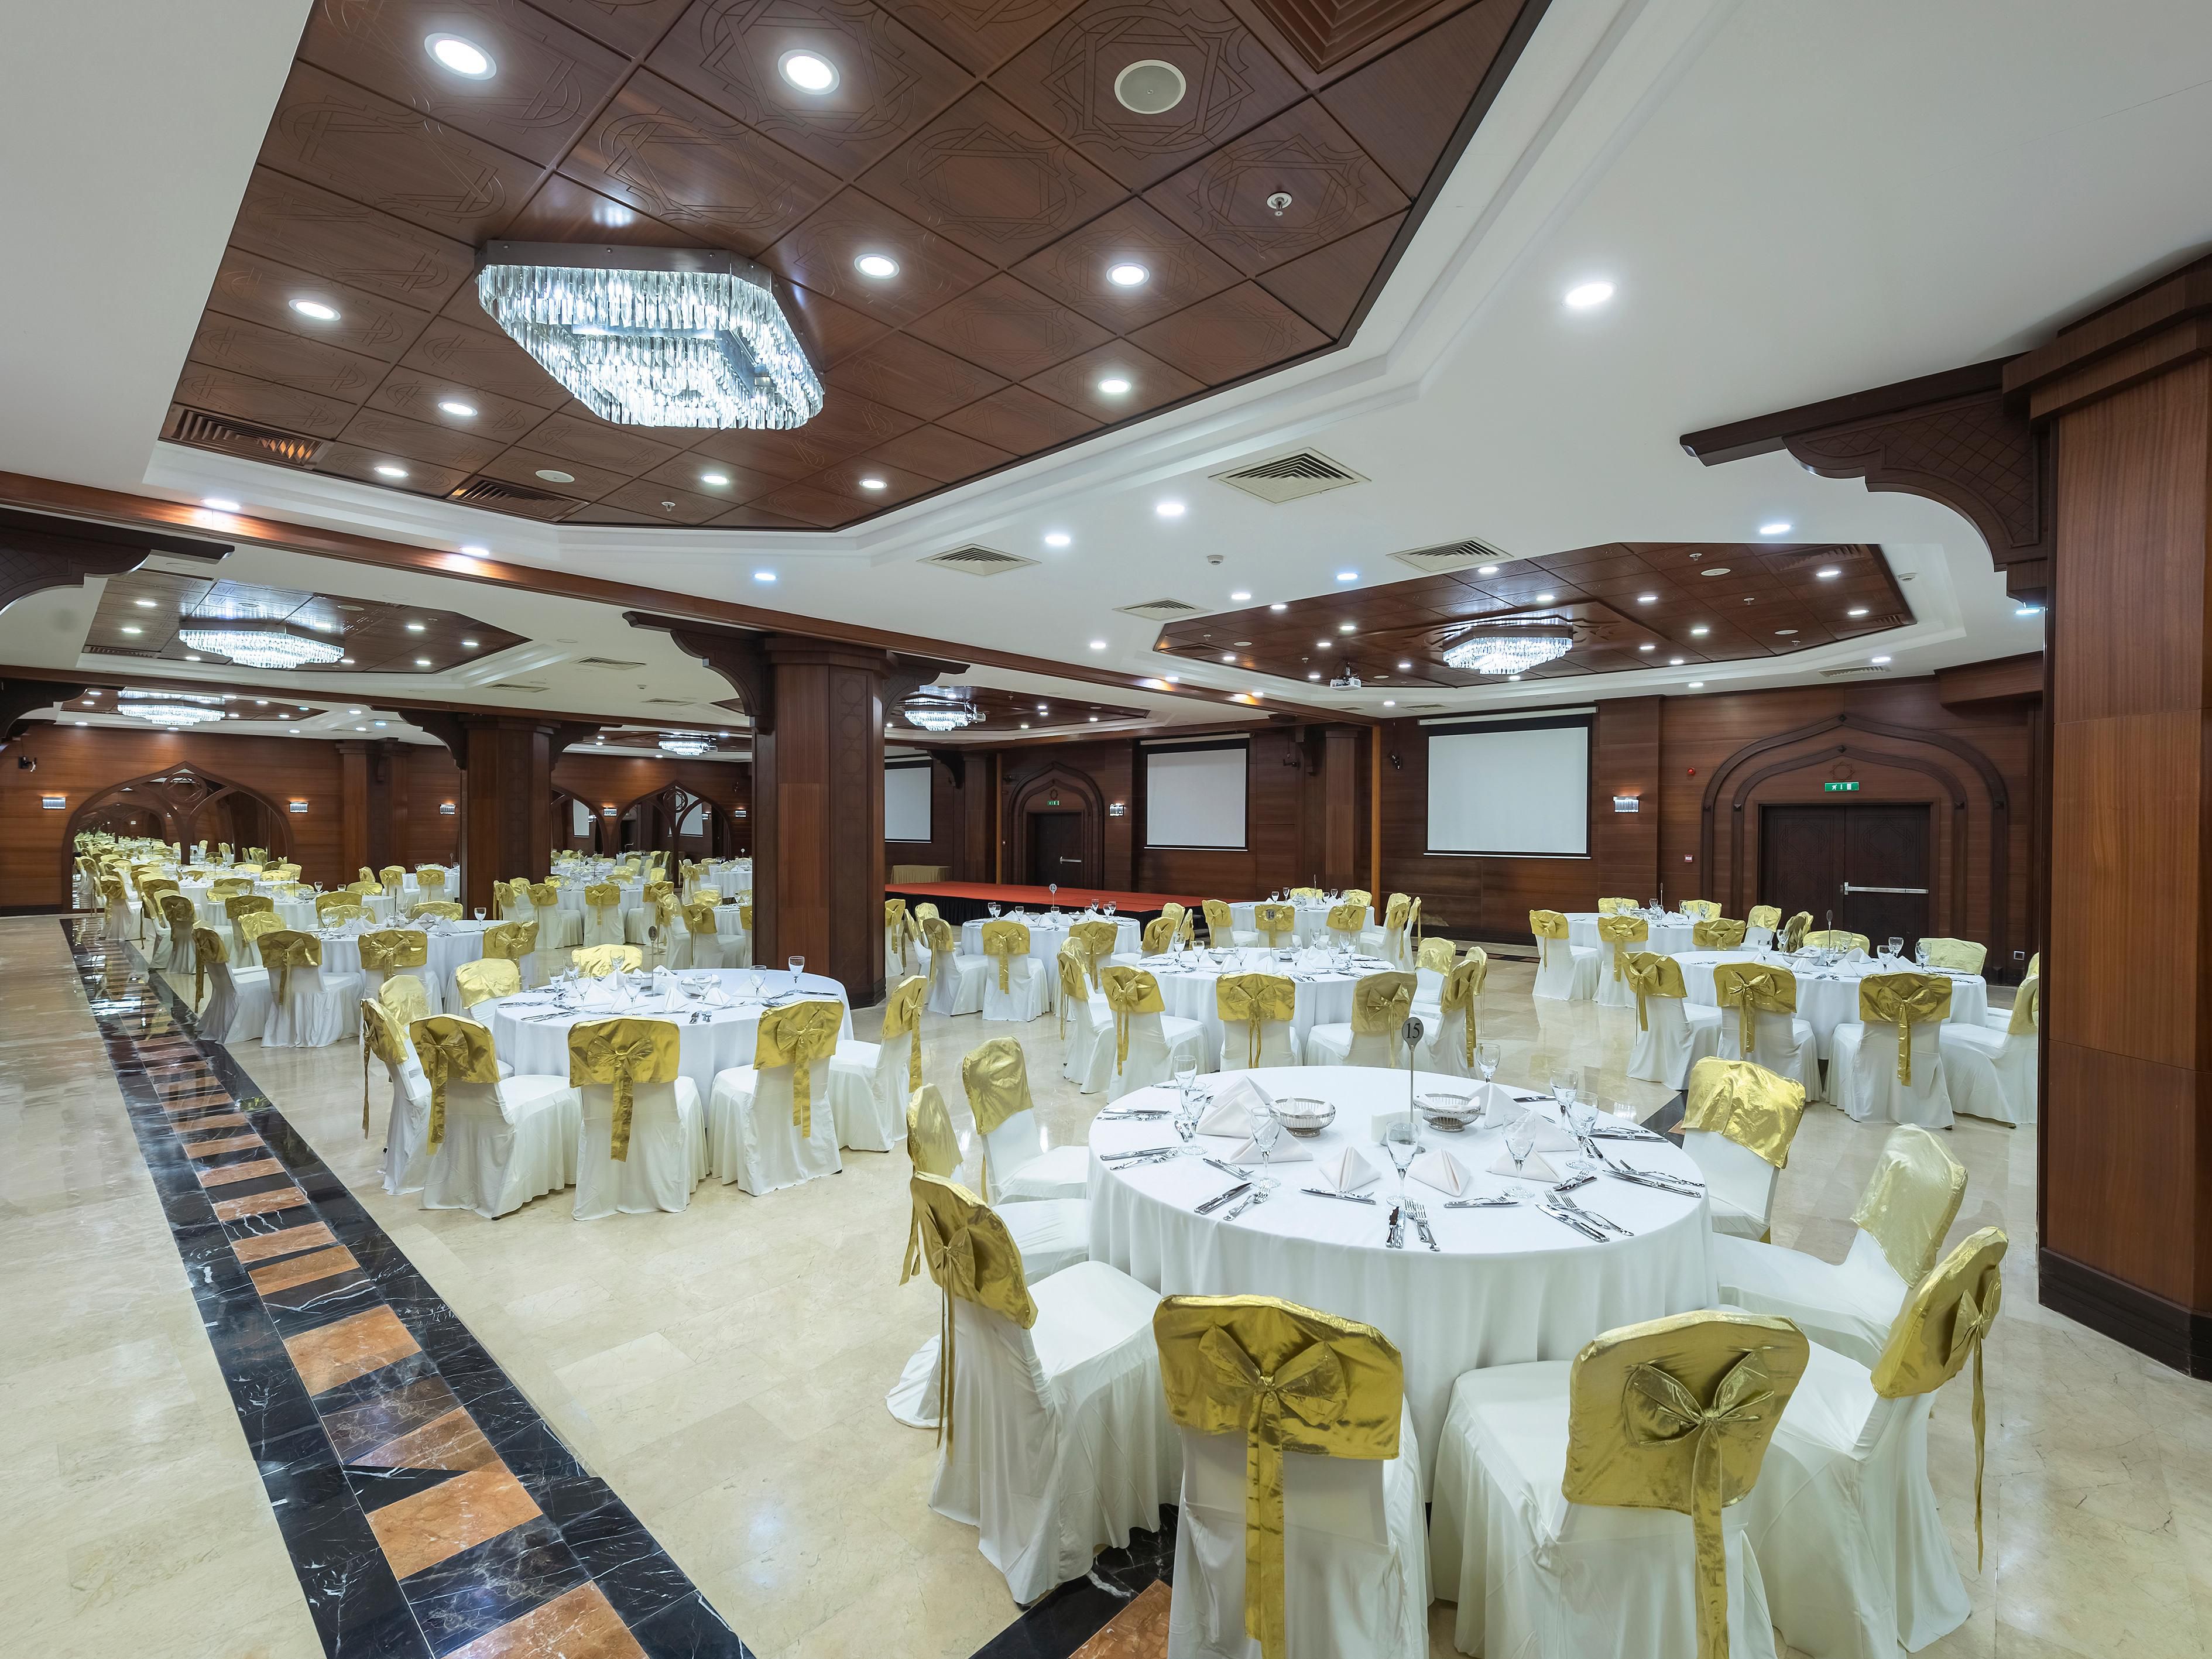 The Meeting space at the Crowne Plaza Antalya provides a bright contemporary and flexible space for meetings, exhibitions and functions of all kinds from weddings to gala dinners.